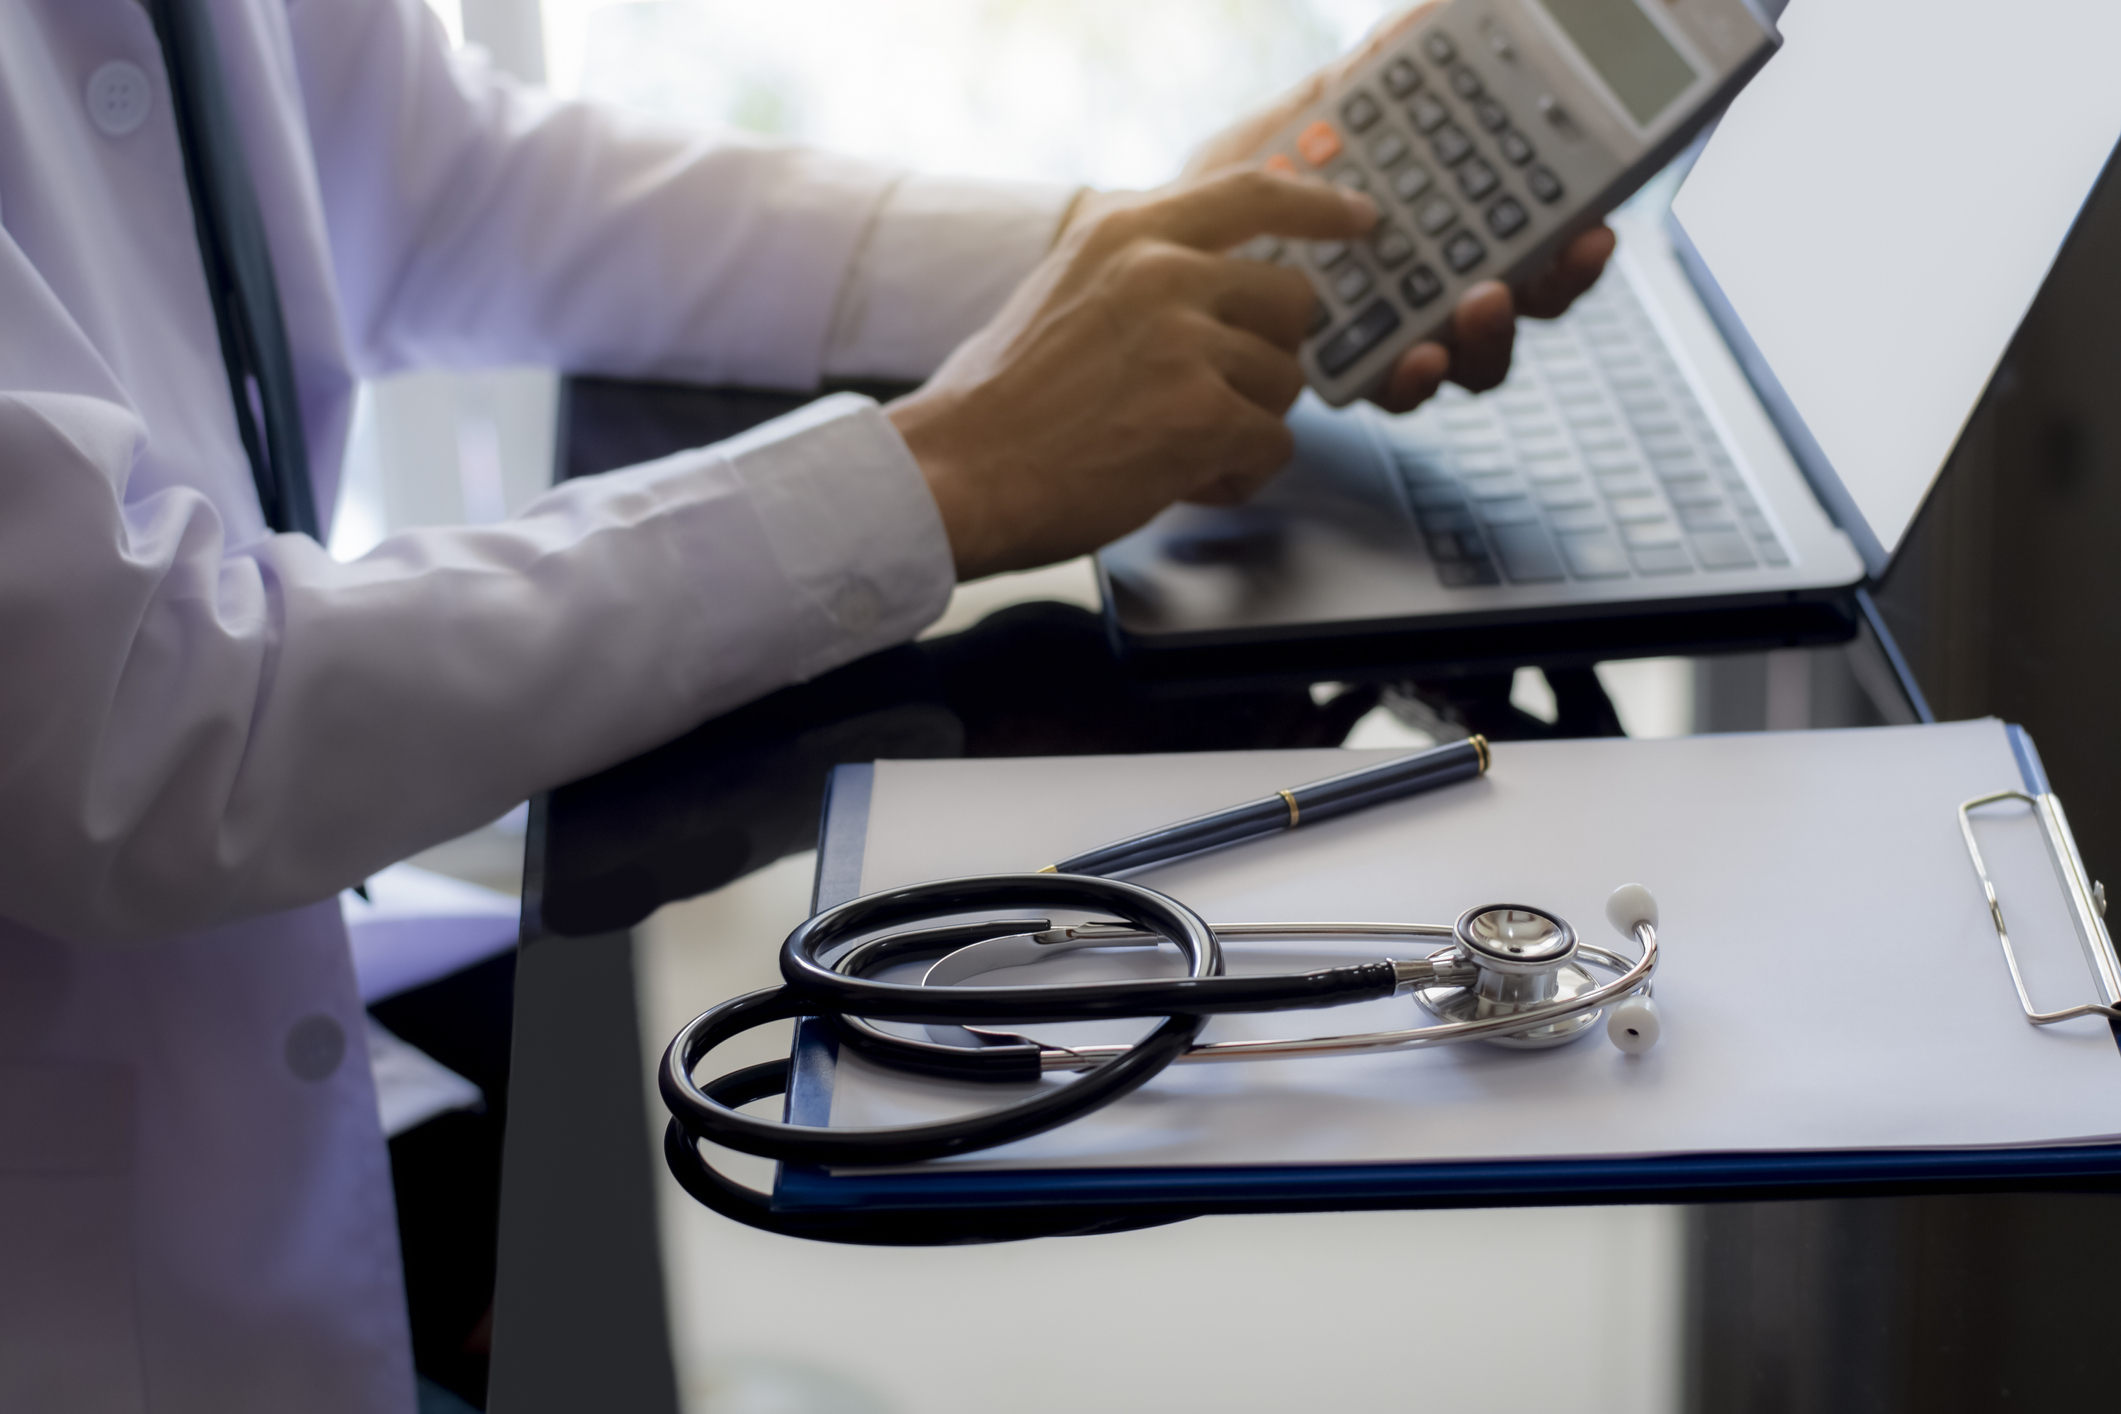 Male doctor or physician using calculator and work on laptop computer with medical stethoscope and clipboard on the desk at clinic or hospital. Medical healthcare costs ,fees and revenue concept that bicycle accidents lawyer assist obtain compensation for brain injuries